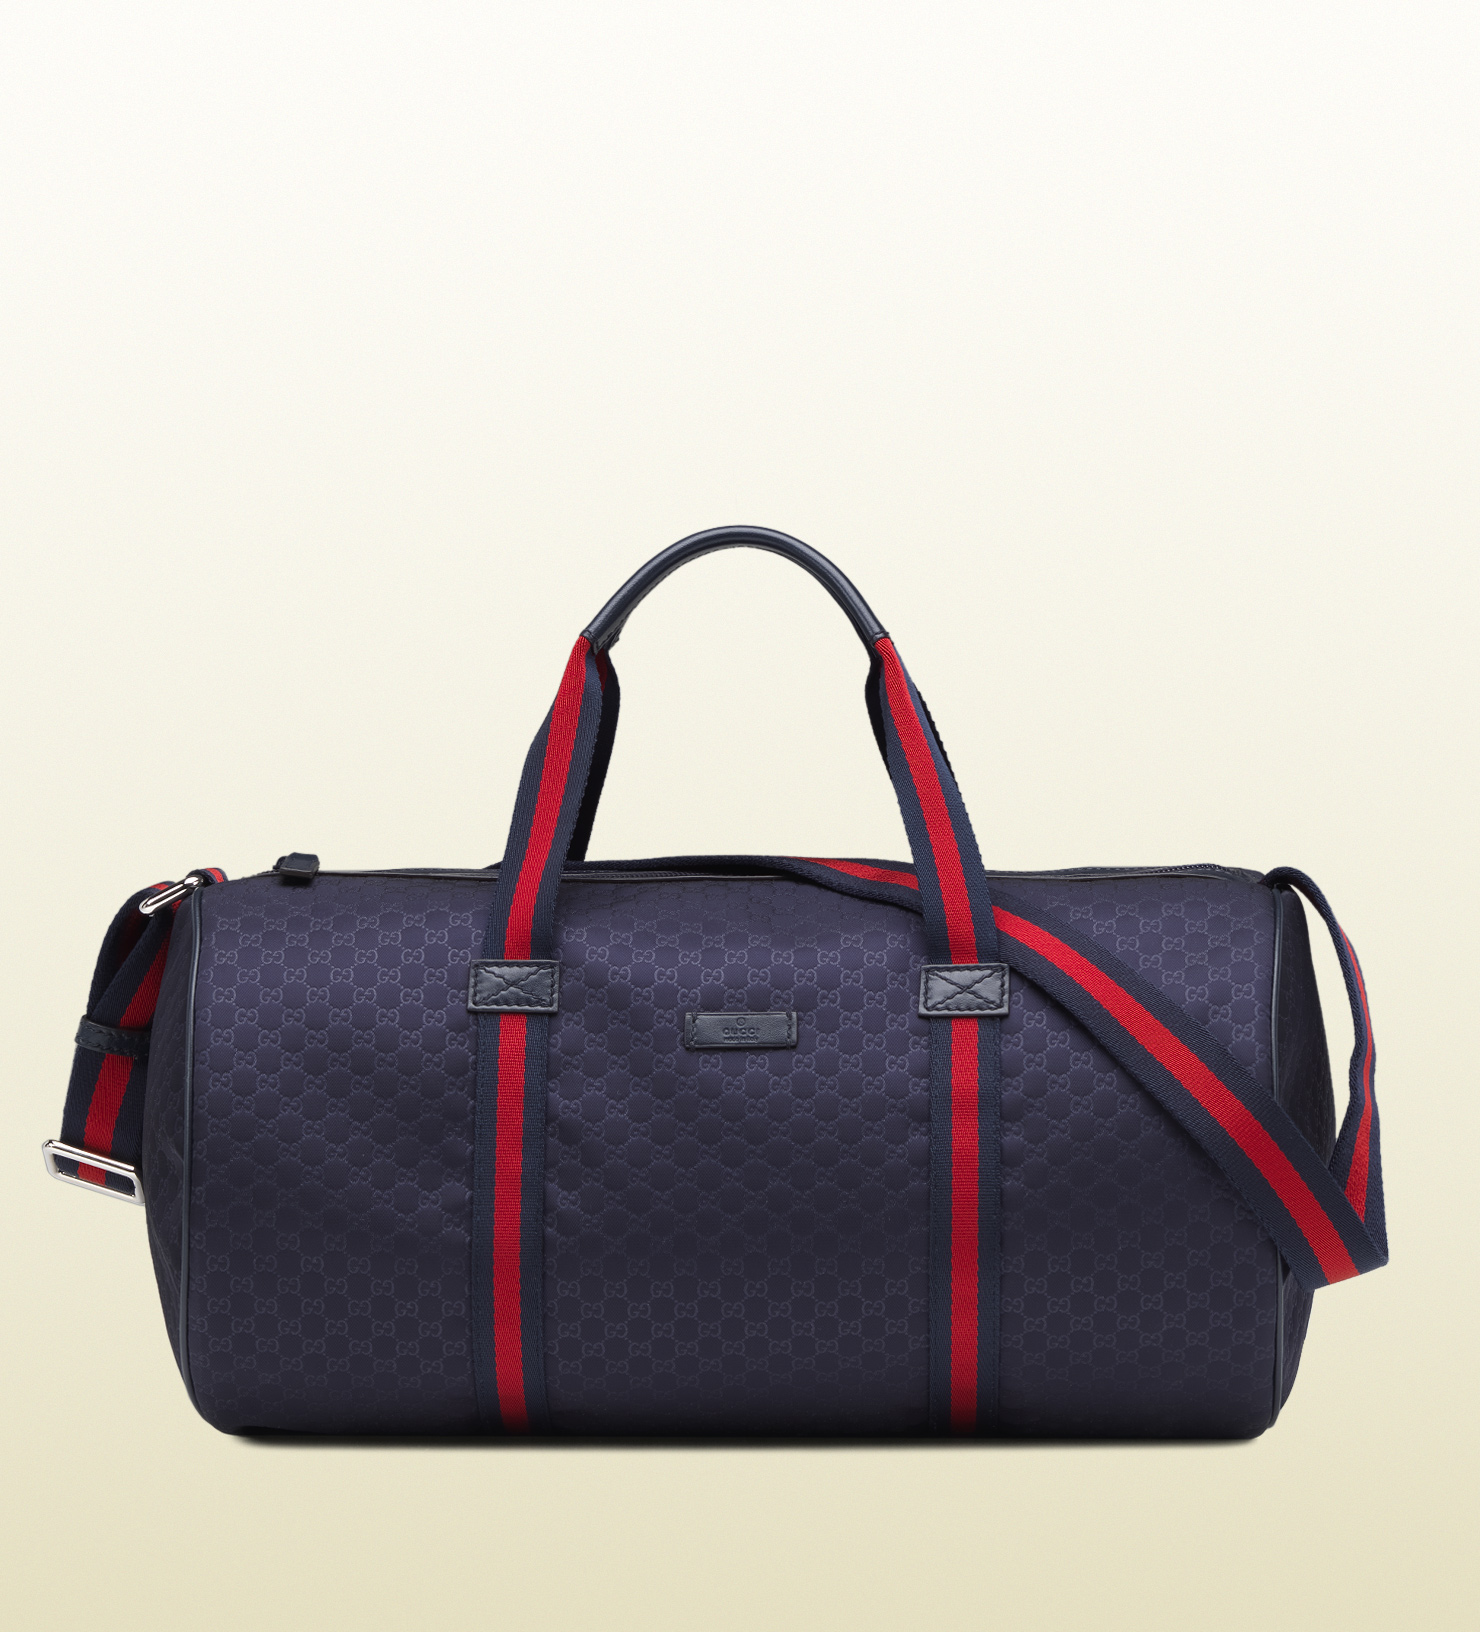 Lyst - Gucci Blue Micro Gg Nylon Gym Bag in Blue for Men